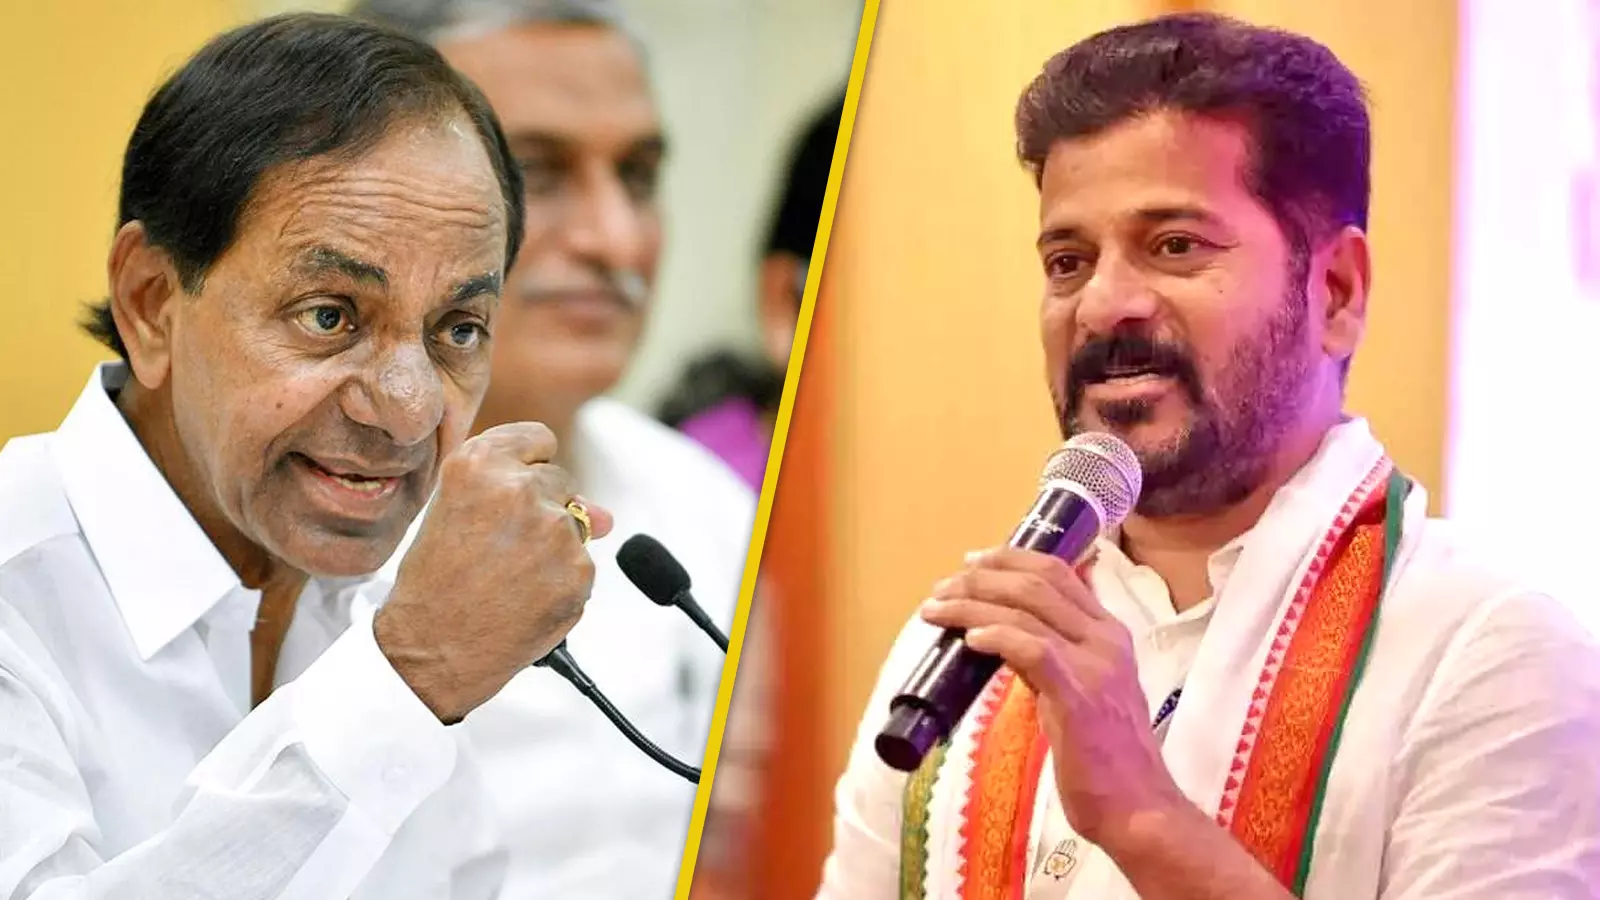 Fear factor? KCR’s ‘obsession’ with Revanth Reddy raises eyebrows in Telangana